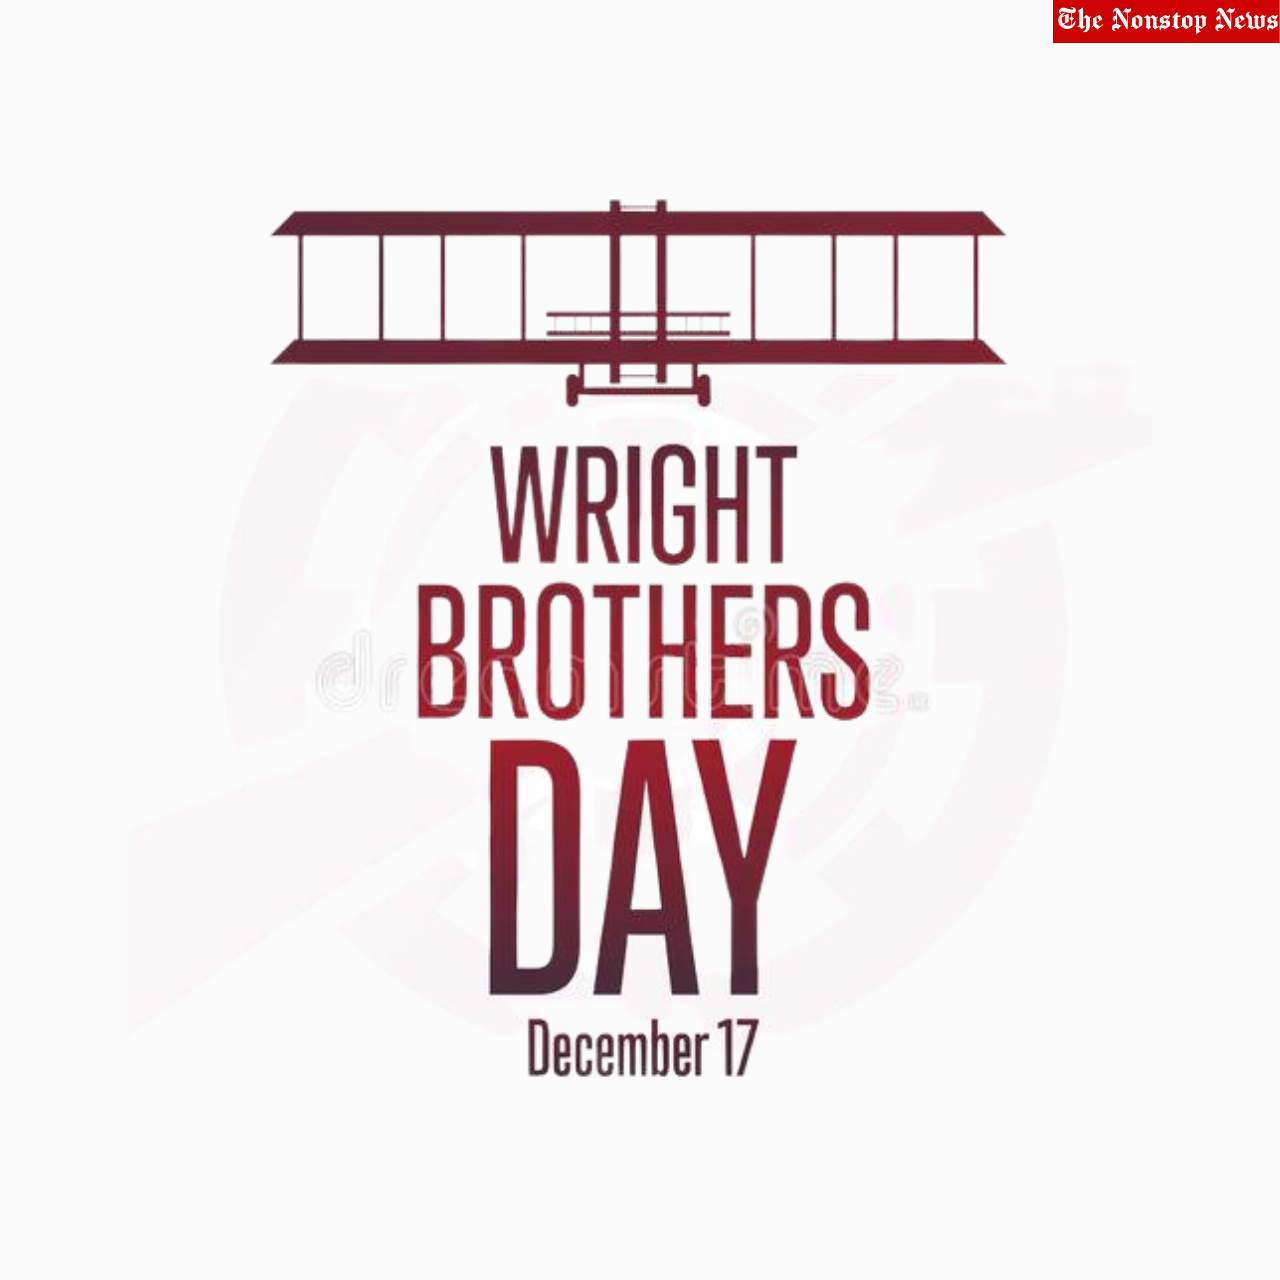 Wright Brothers Day 2021 Quotes, HD Images, Clipart, Instagram Captions, and Posters to honor inventors of Airplanes